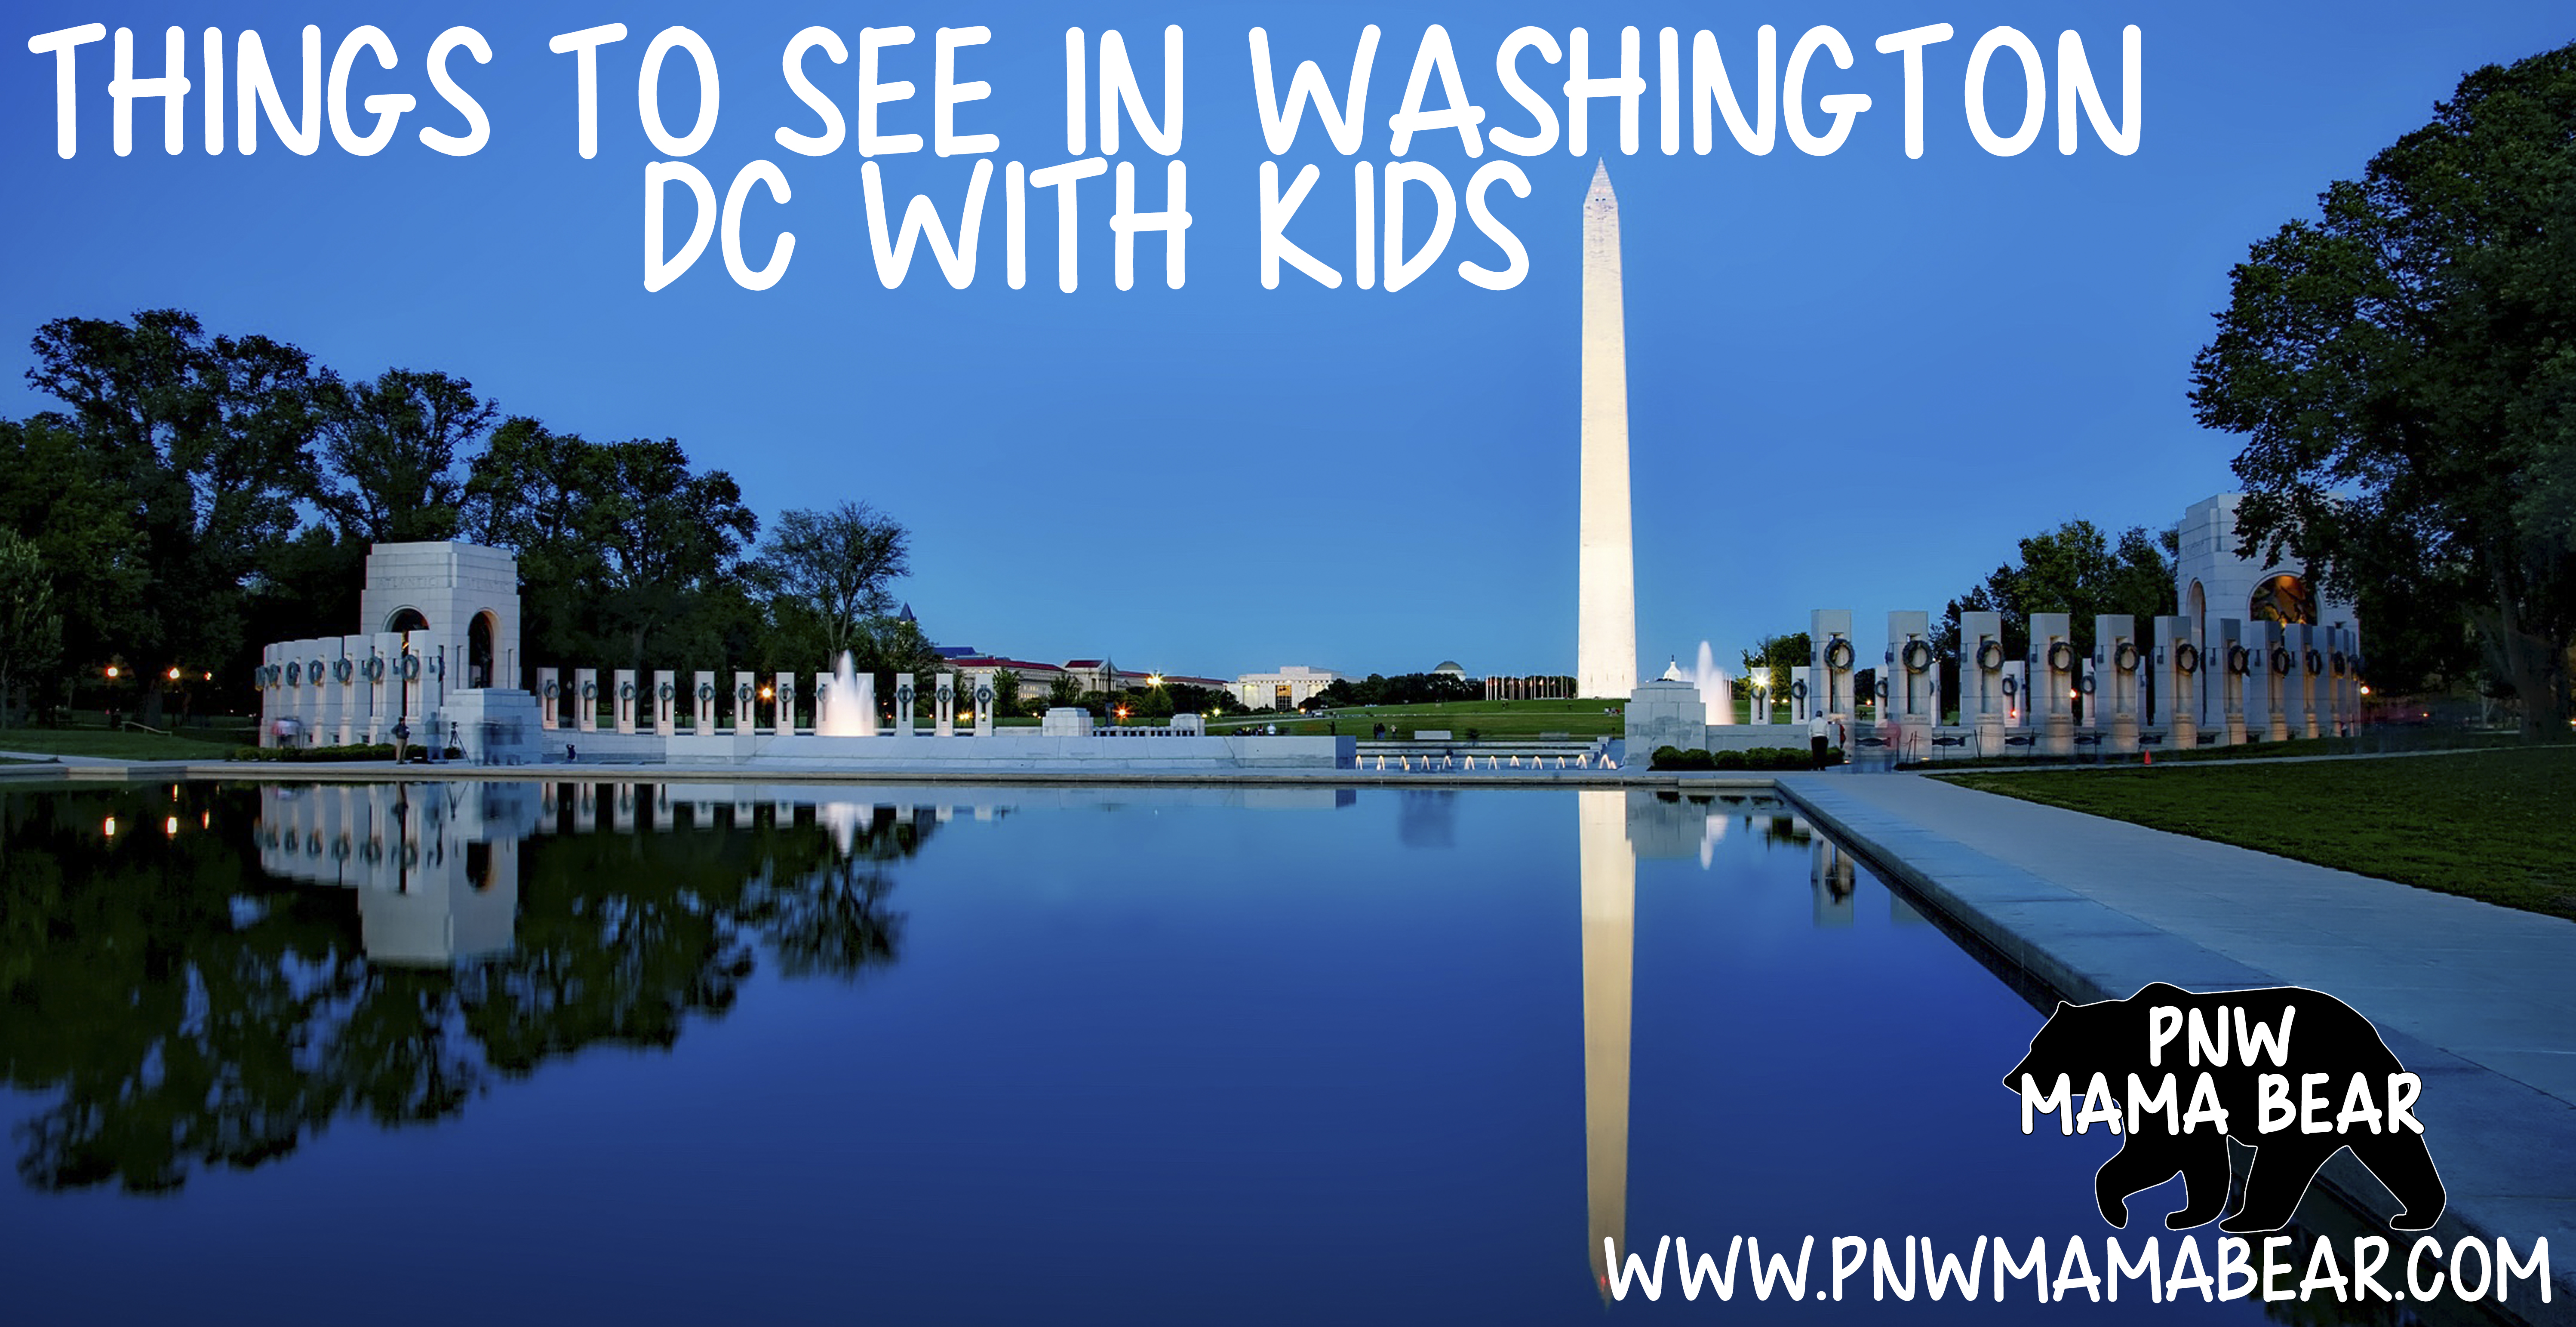 Things to See in Washington DC with Kids by PNW Mama Bear